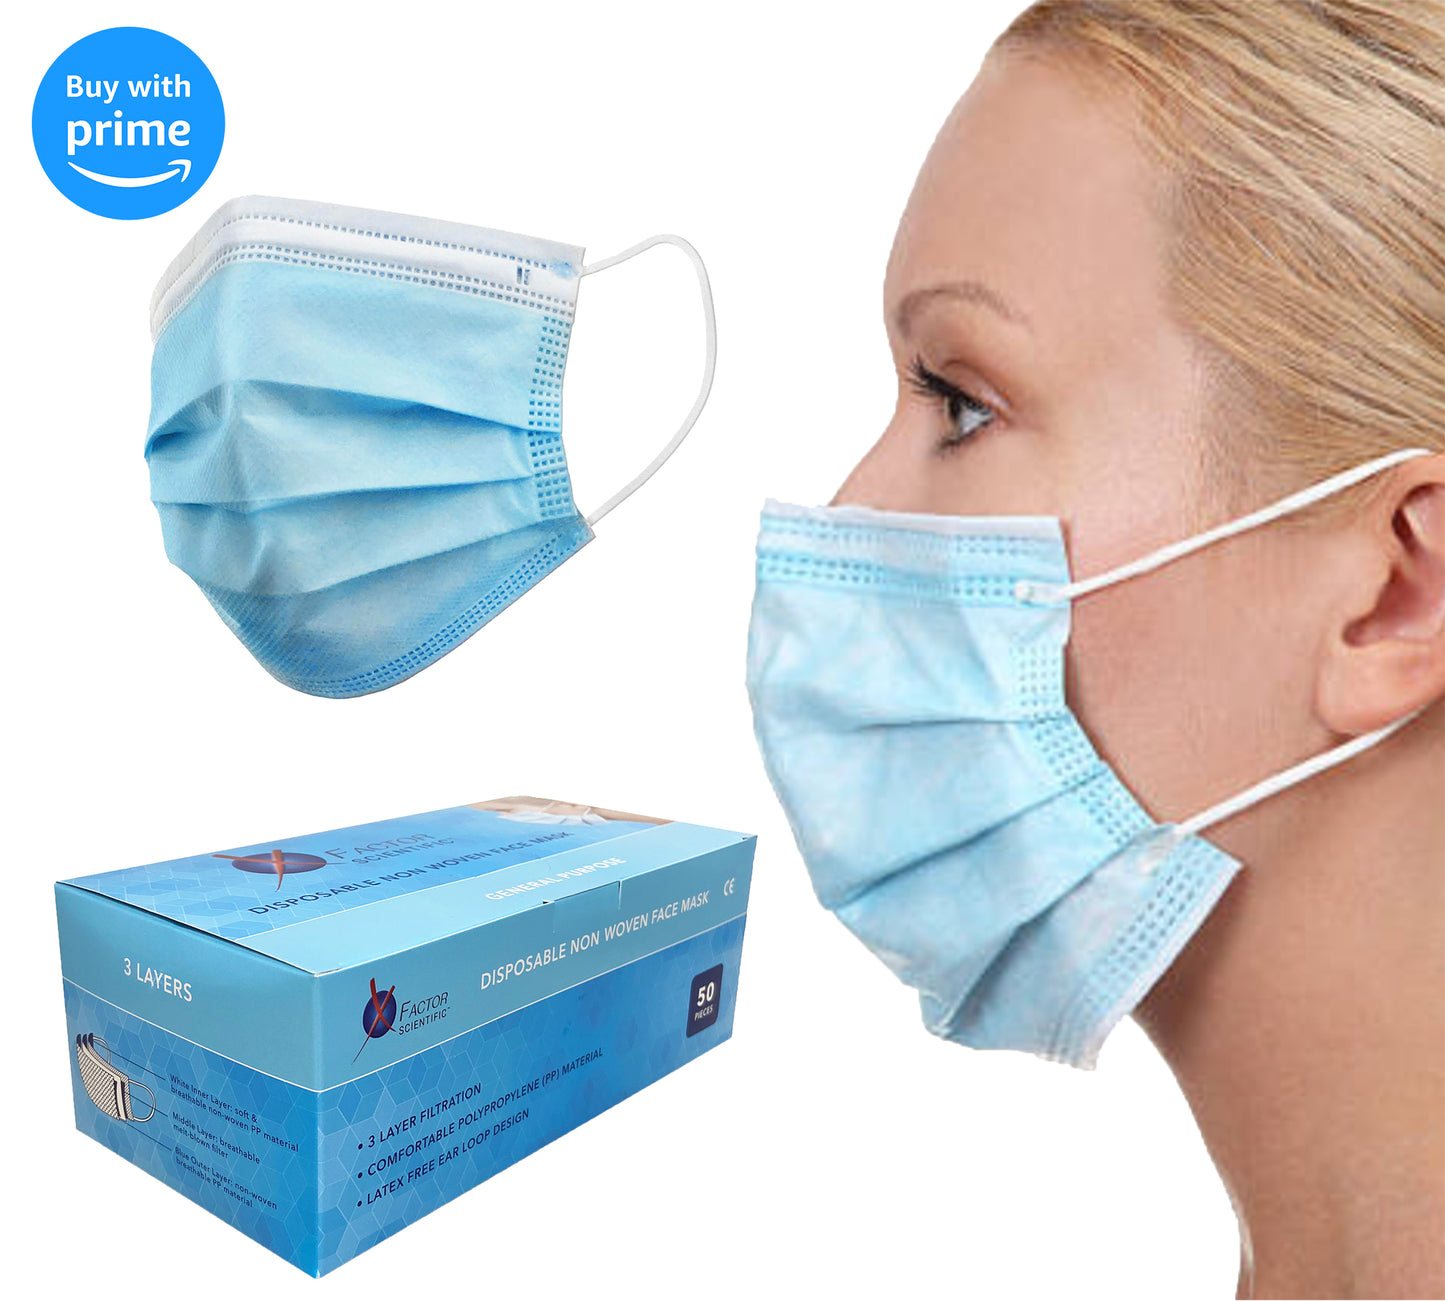 50 pcs/box - 3 Ply Medical Face Masks (Type IIR/Level 2), Breathable, Ear Loop, Free Shipping